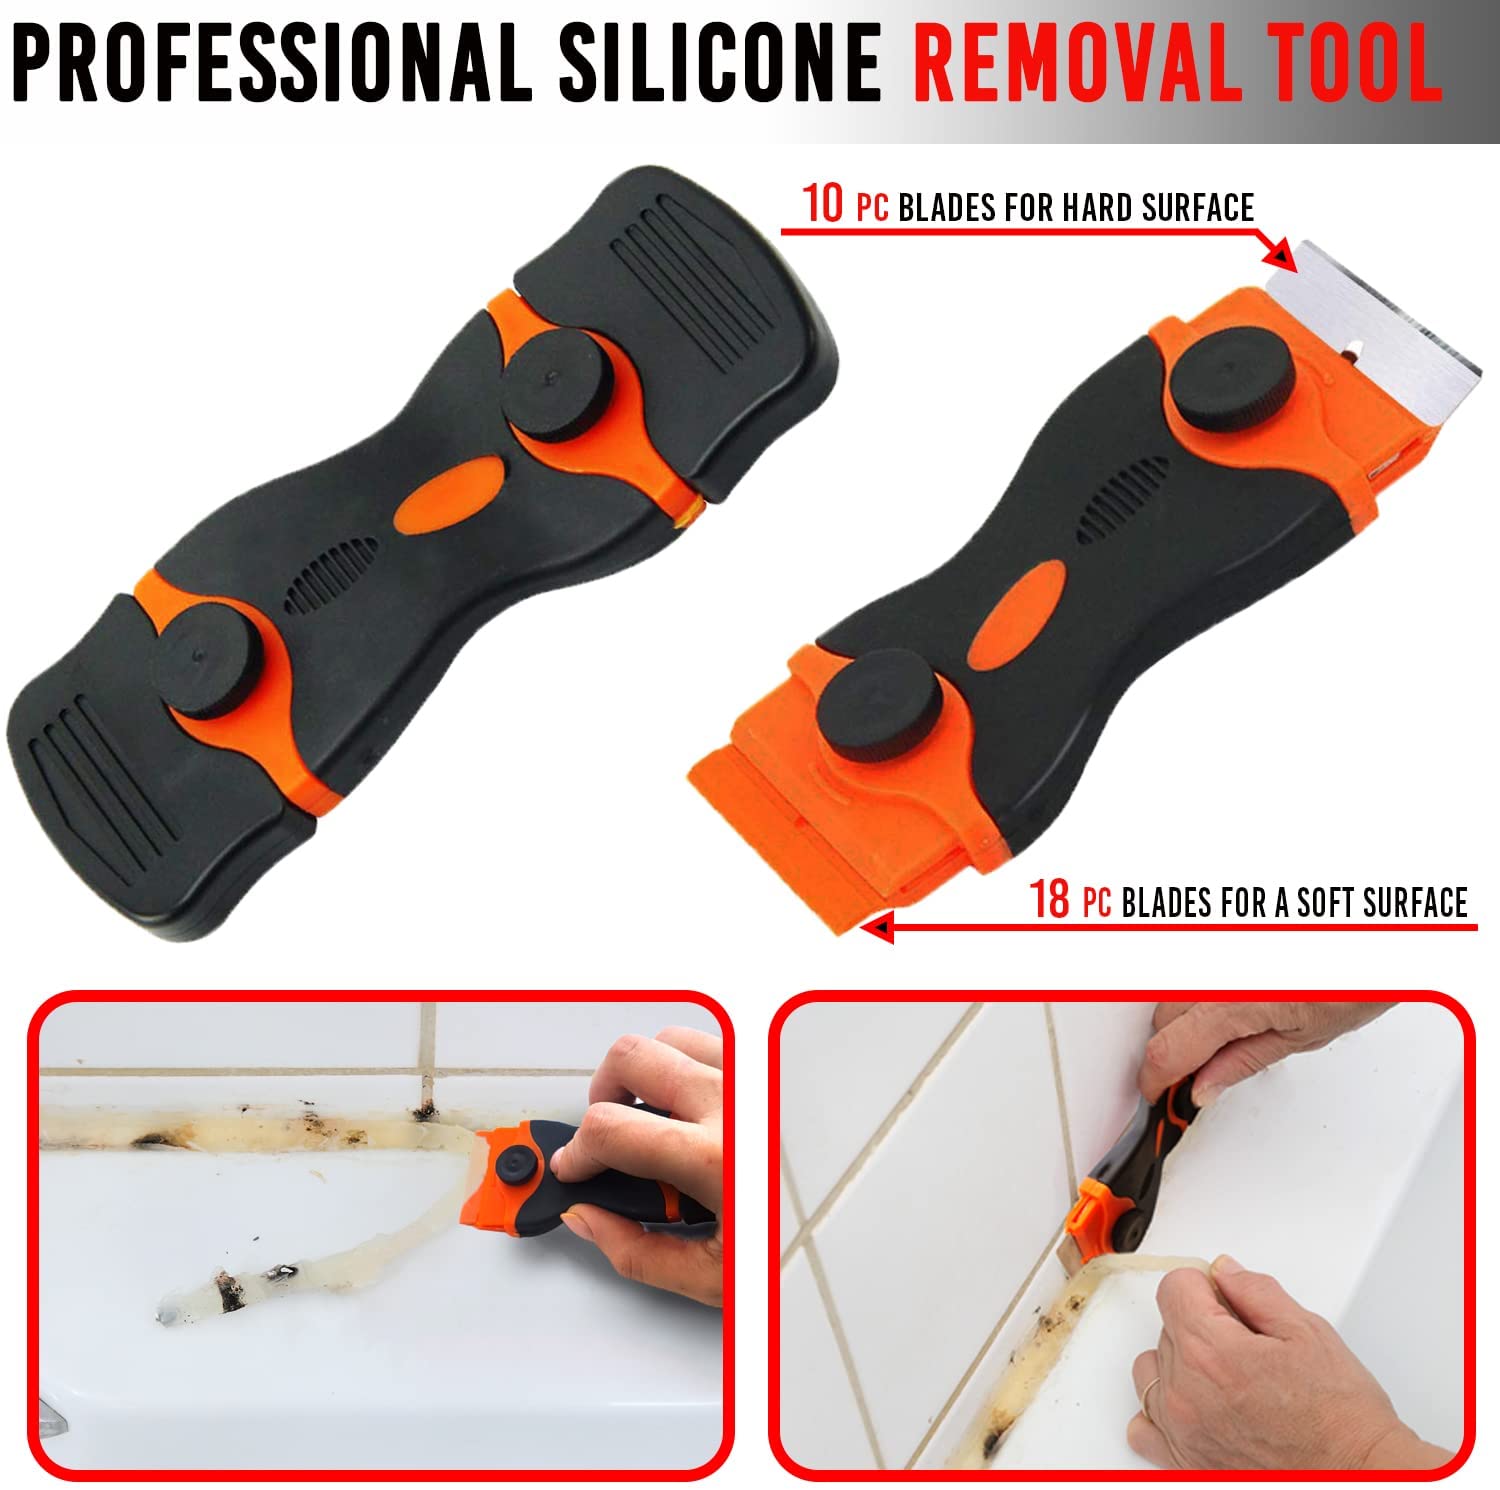 How to Use Caulking and Scraper Tools Razor Blade Remover